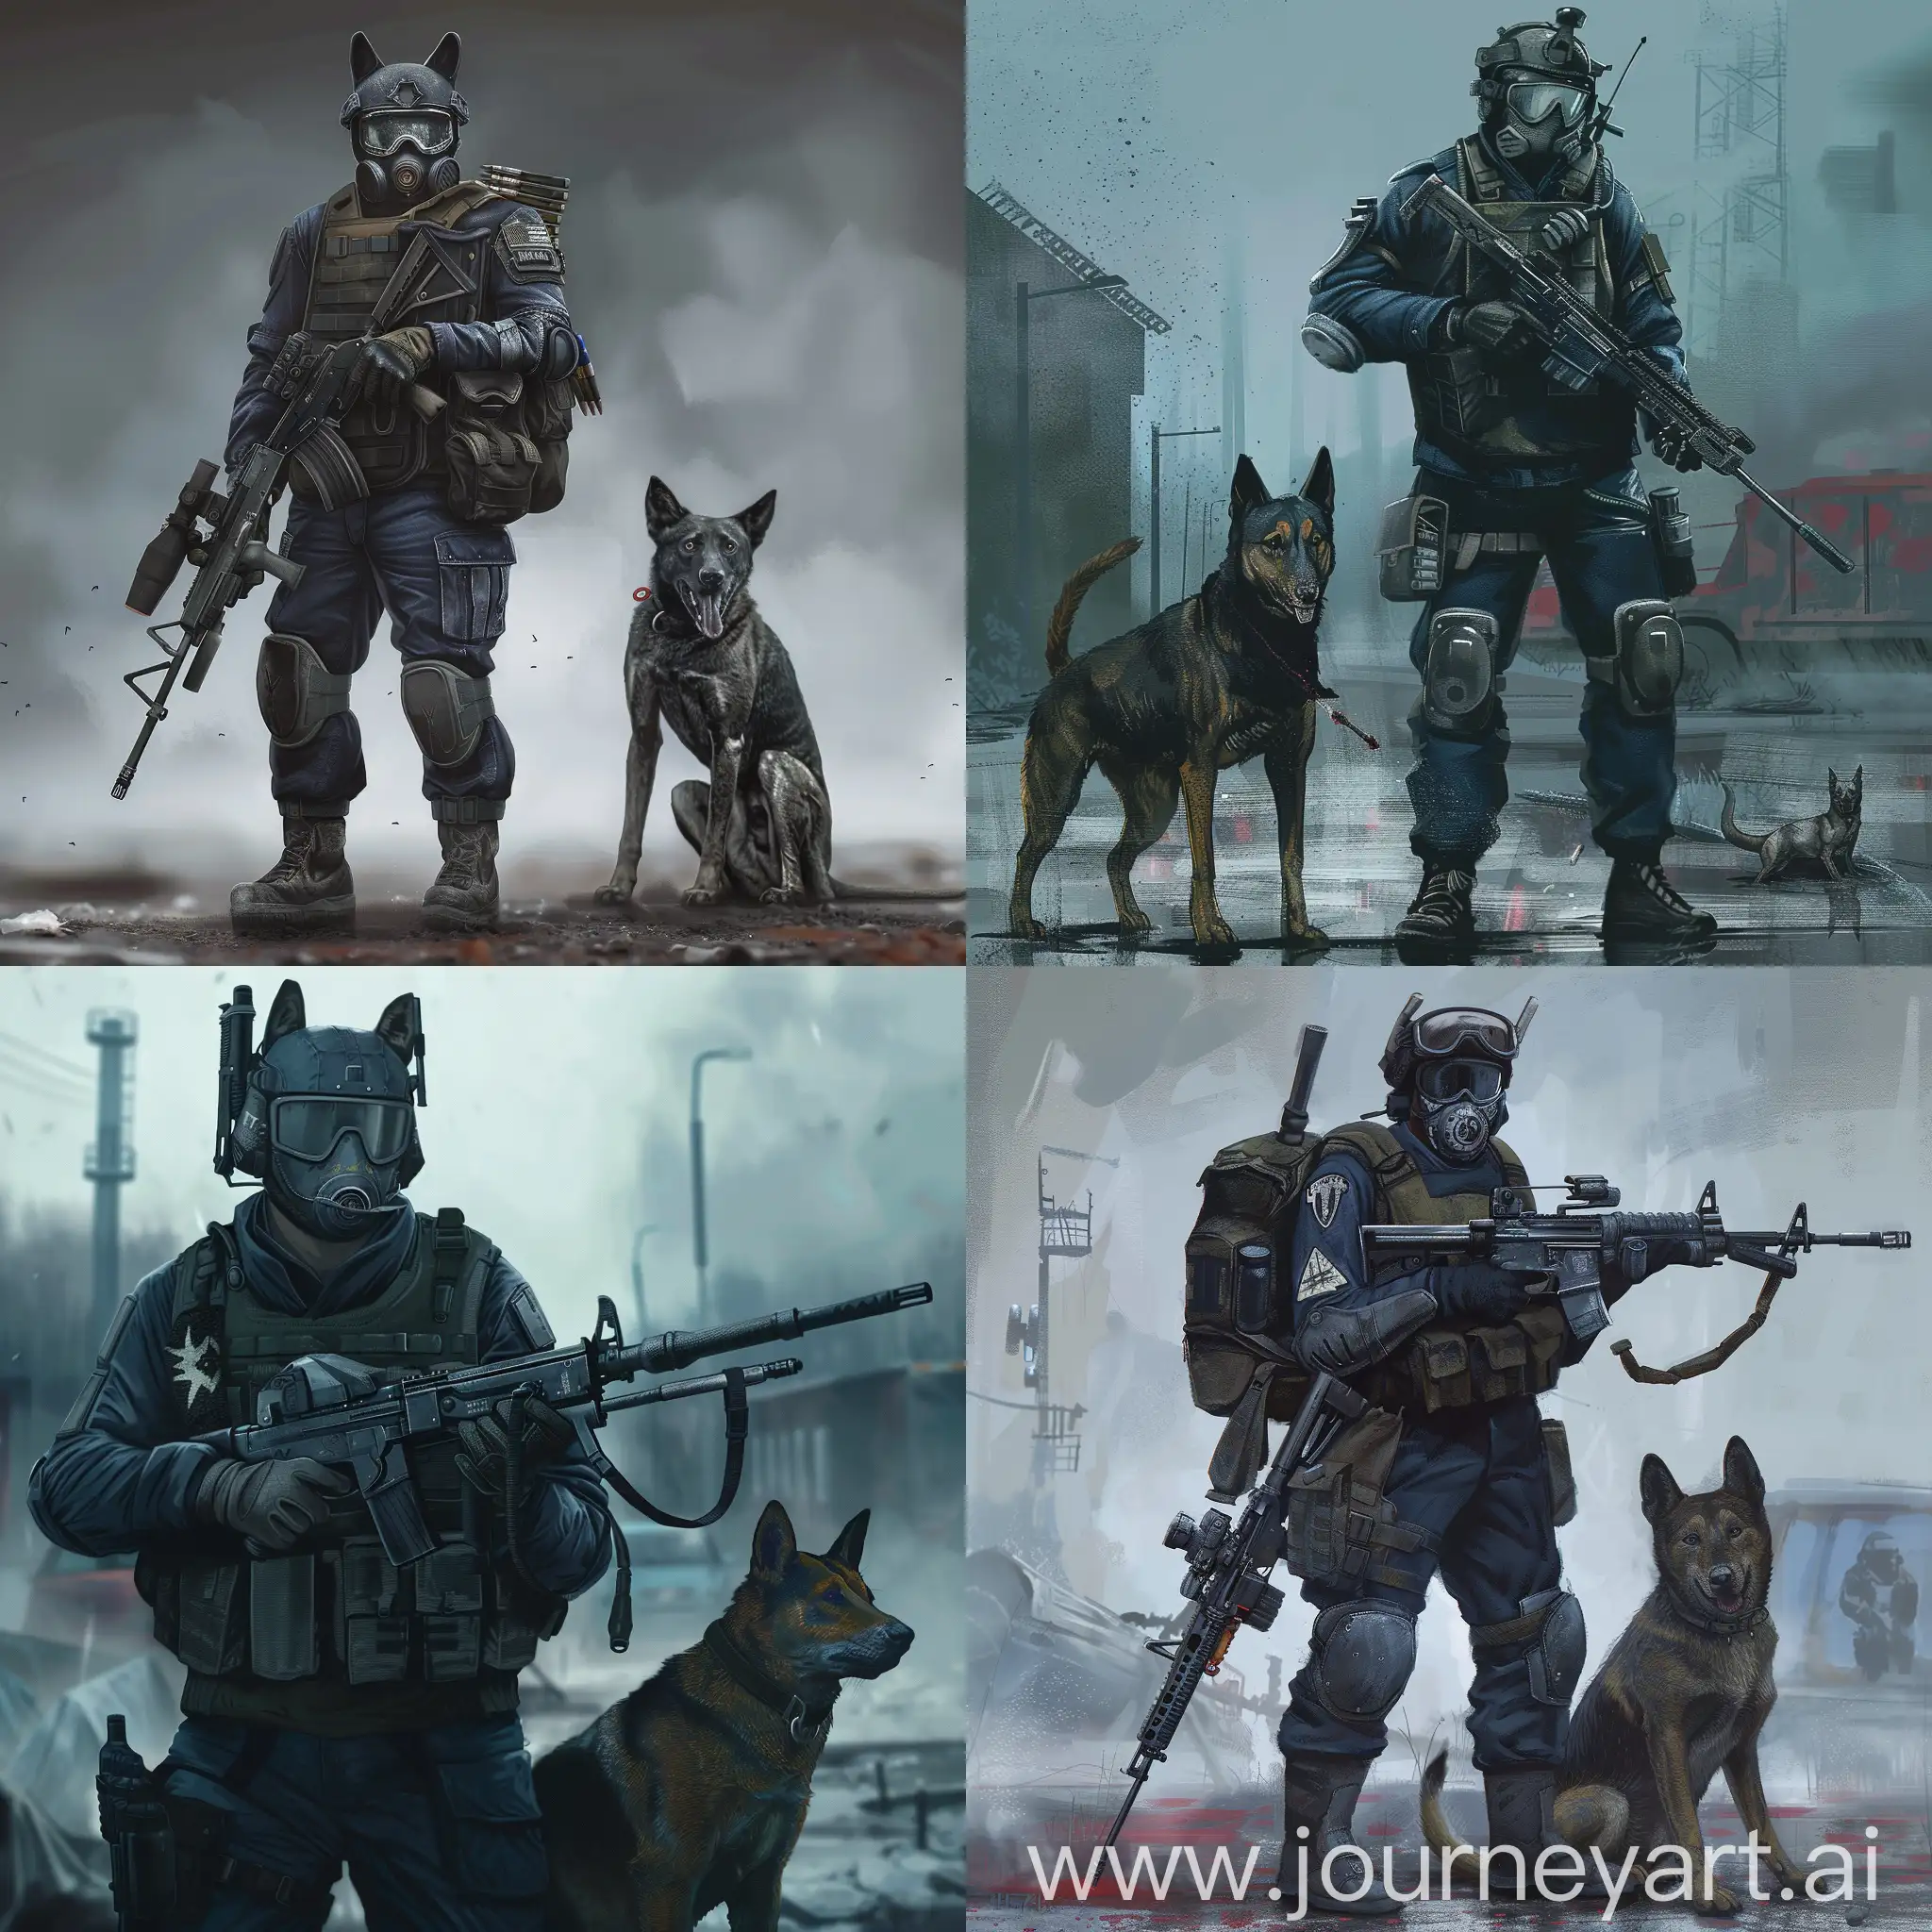 A digital game character concept art, mercenary in a gasmask, helmet, a heavy dark blue armored suit, military unloading, in the hands a hunting sniper rifle, with dog mutant on radiation chernobyl zone.